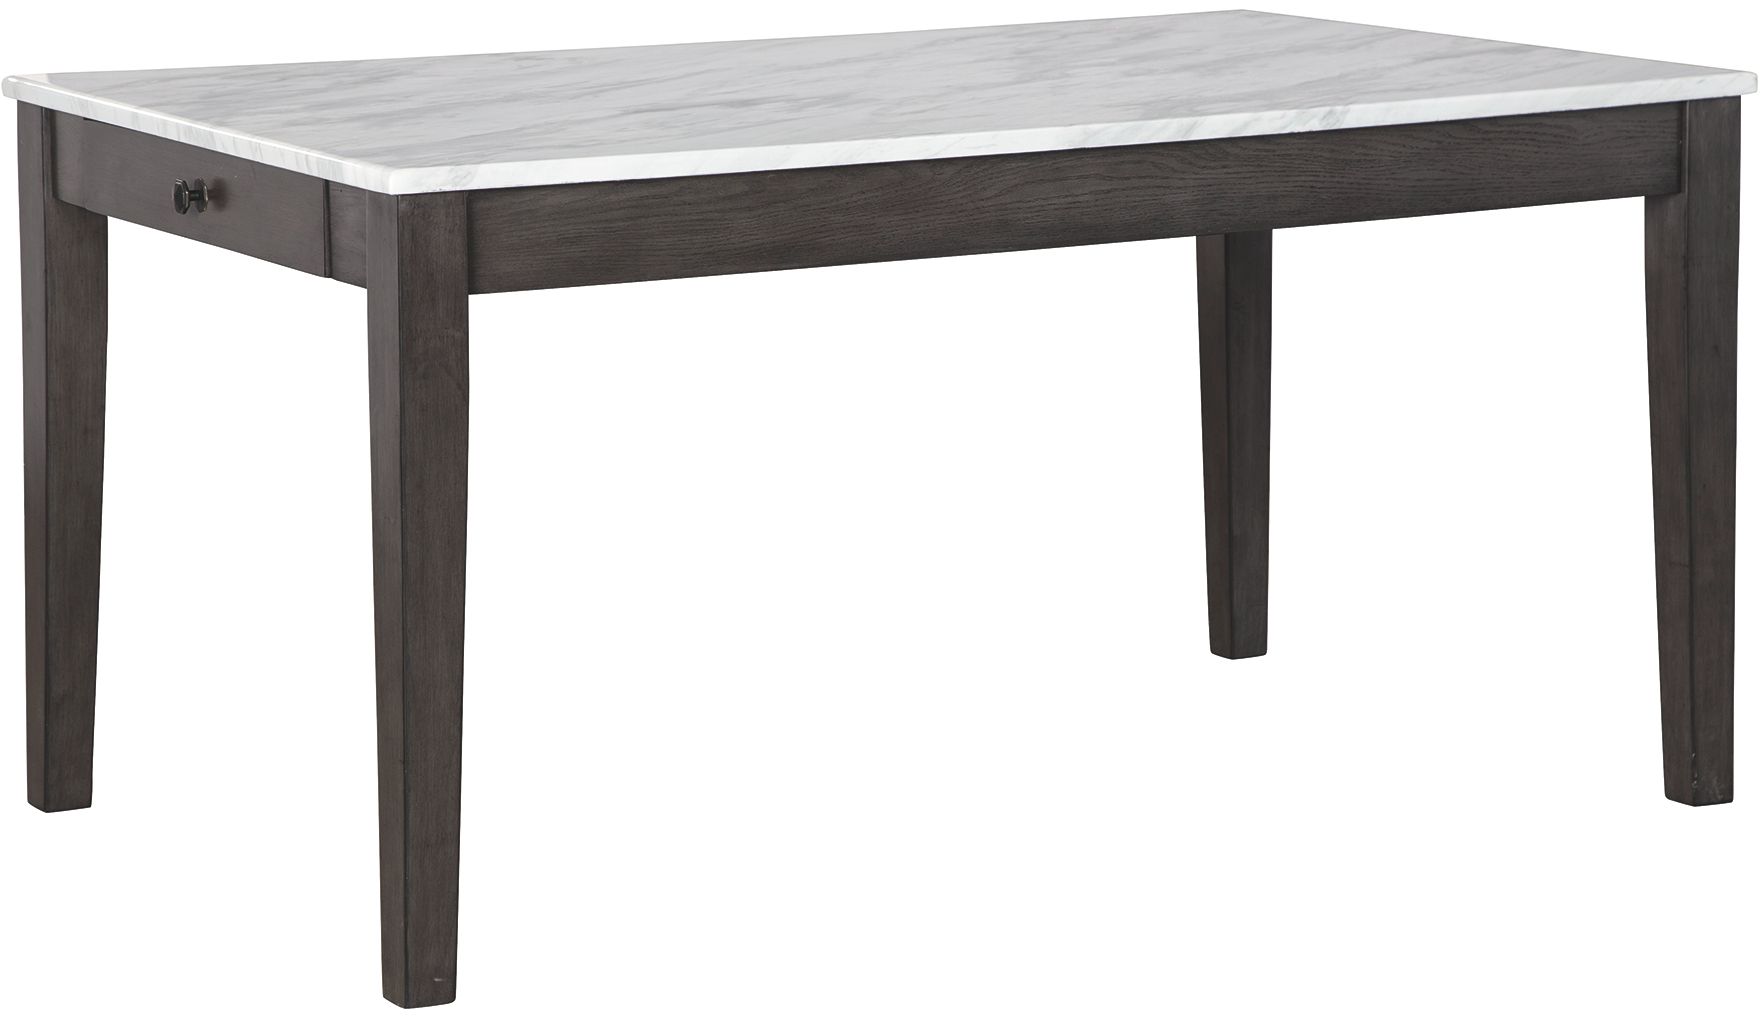 Benchcraft® Luvoni White/Dark Charcoal Gray Rectangular Dining Room Table